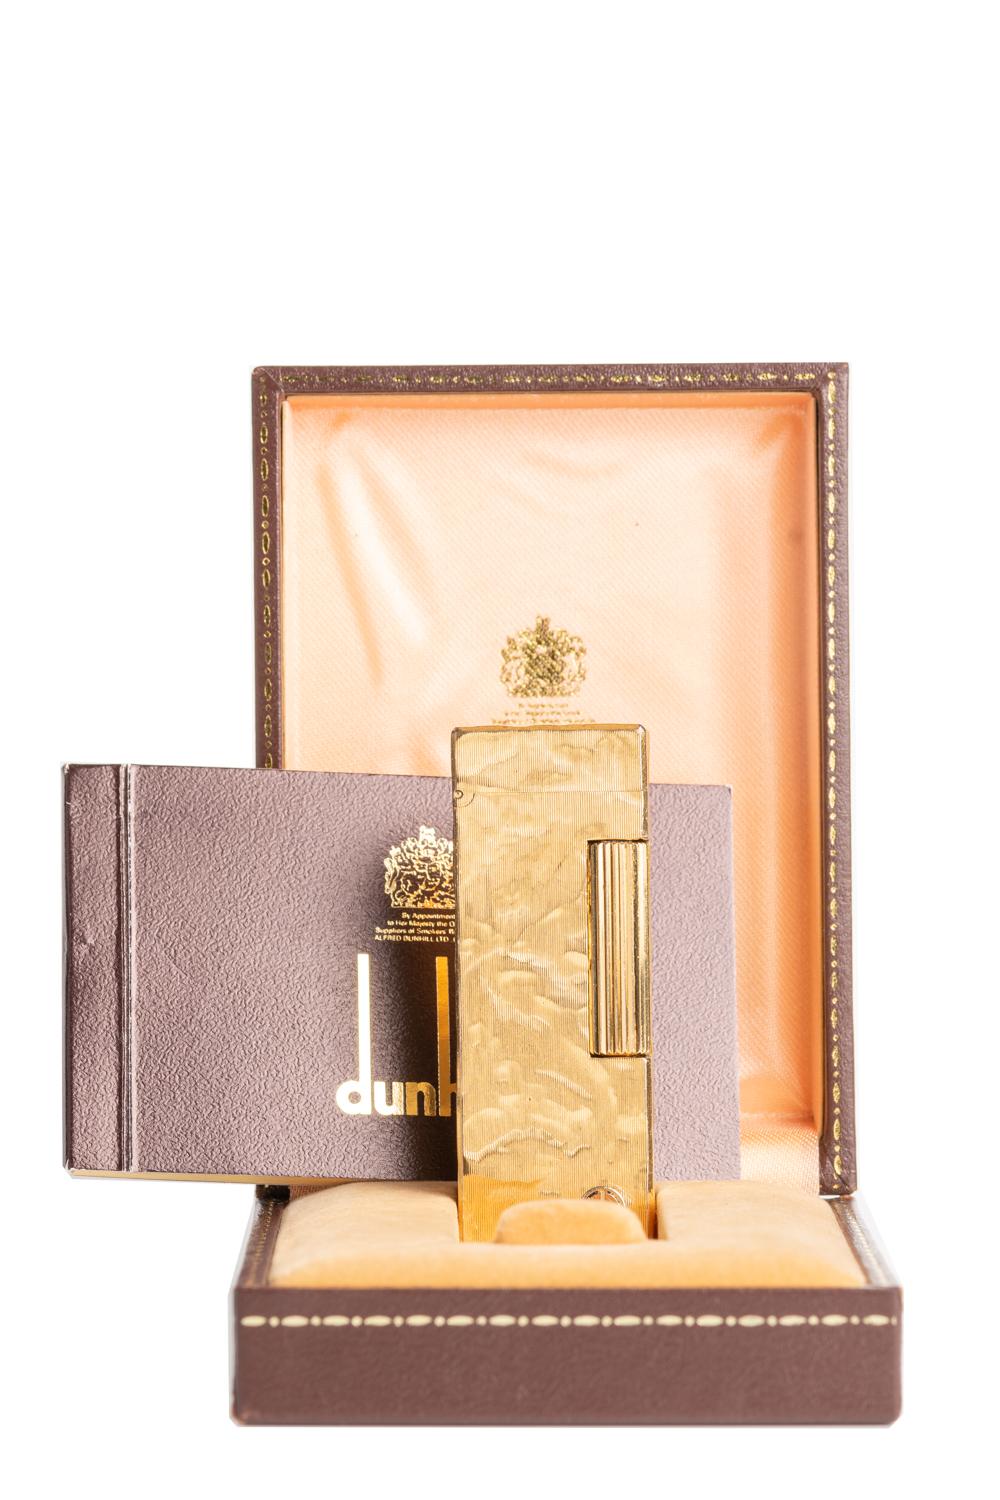 A classic and elegant Dunhill Rollagas Lighter with a fantastic abstract texture. The lighter comes with an original box and papers. Stamped on the base 'Dunhill' and 'SWISS MADE' with a 'd' mark on the front. This a great birthday gift for someone